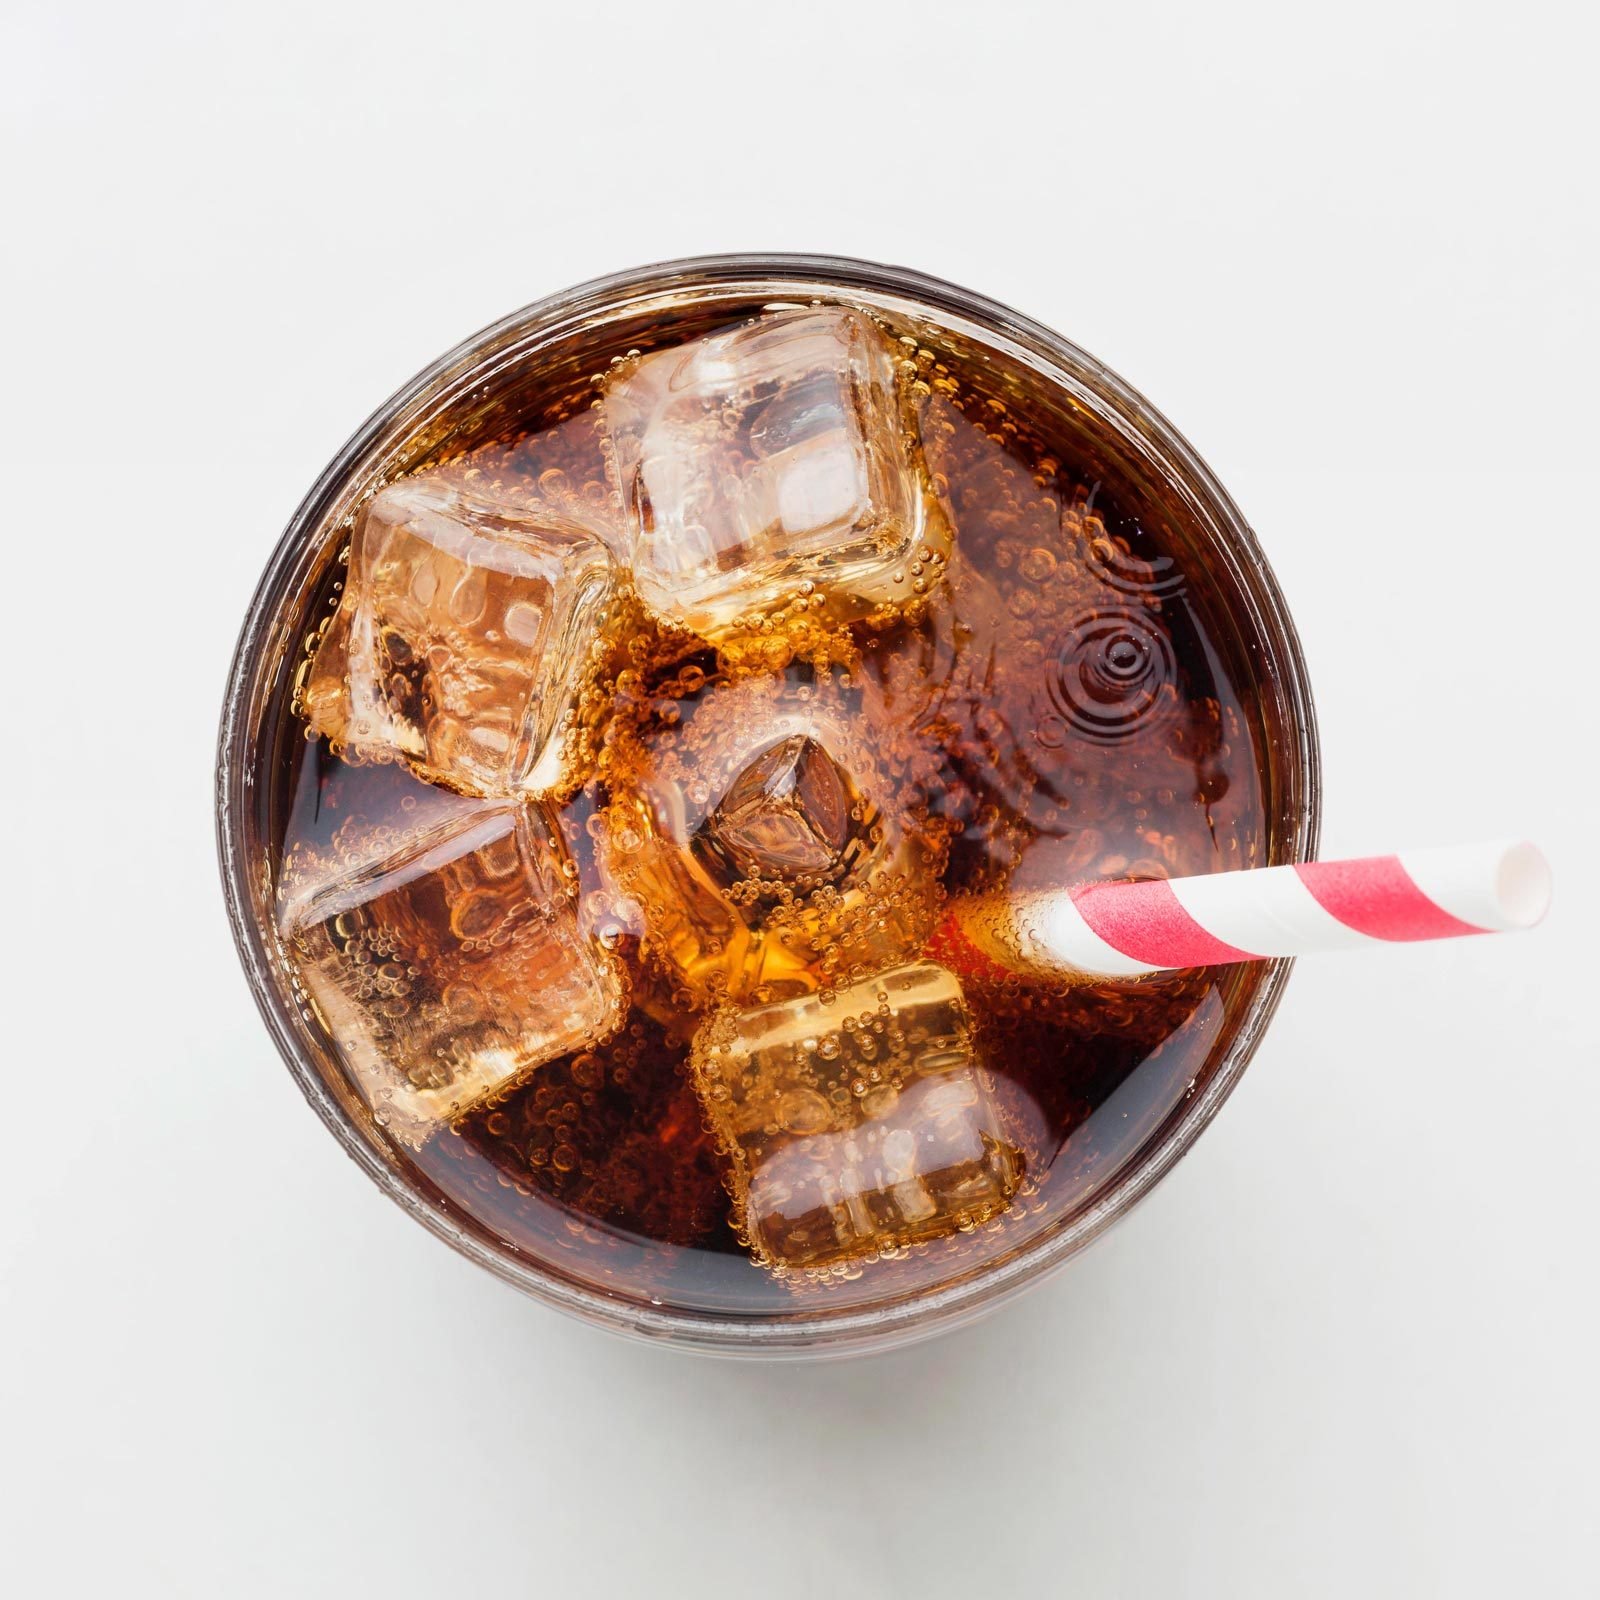 https://www.thehealthy.com/wp-content/uploads/2023/05/what-happens-when-you-drink-soda-every-day-GettyImages-1383952445.jpg